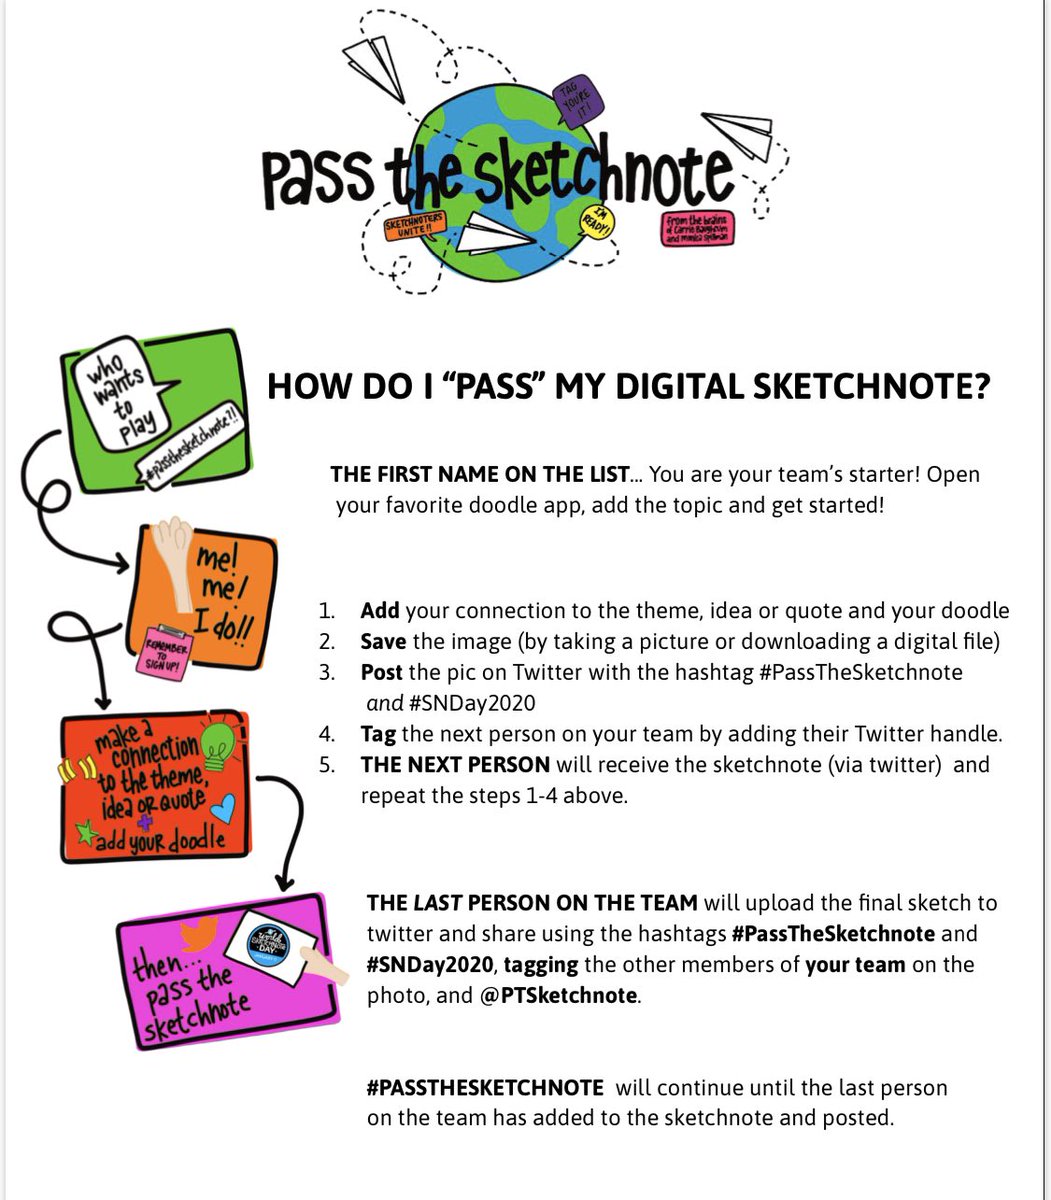 I’m excited to be taking part in my first World Sketchnote Day tomorrow! Our #sketchnote will start in New Zealand, then on to Addis Ababa ➡️ Quebec ➡️ Oklahoma ➡️ Los Angeles where I will finish the sketchnote and post for #Team5 #SNDay2020 #passthesketchnote